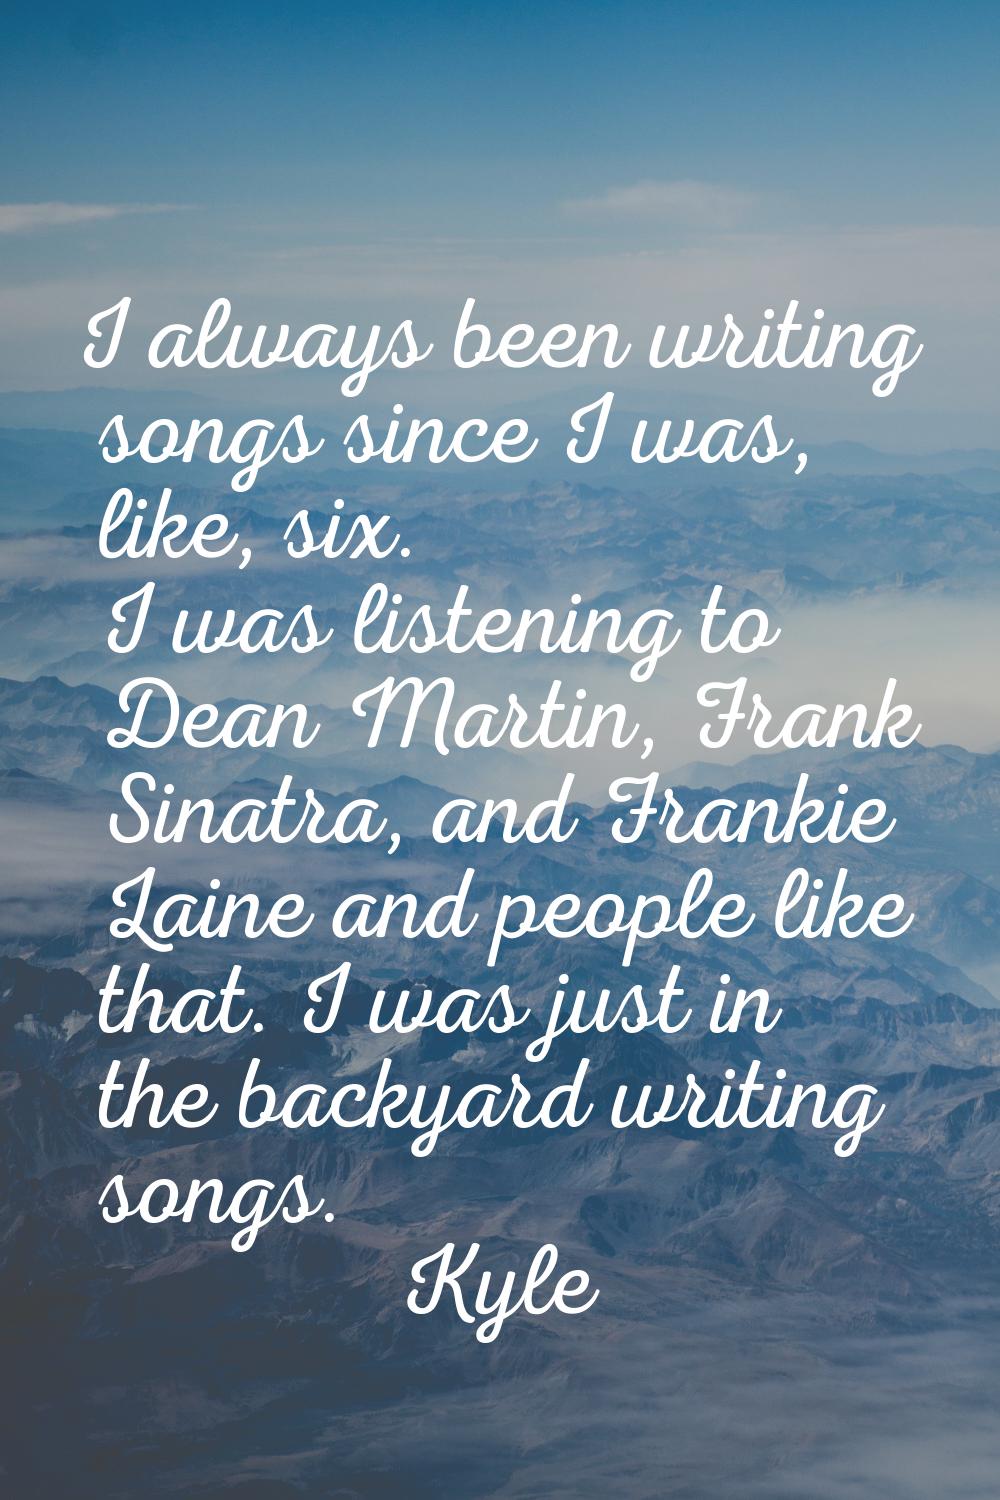 I always been writing songs since I was, like, six. I was listening to Dean Martin, Frank Sinatra, 